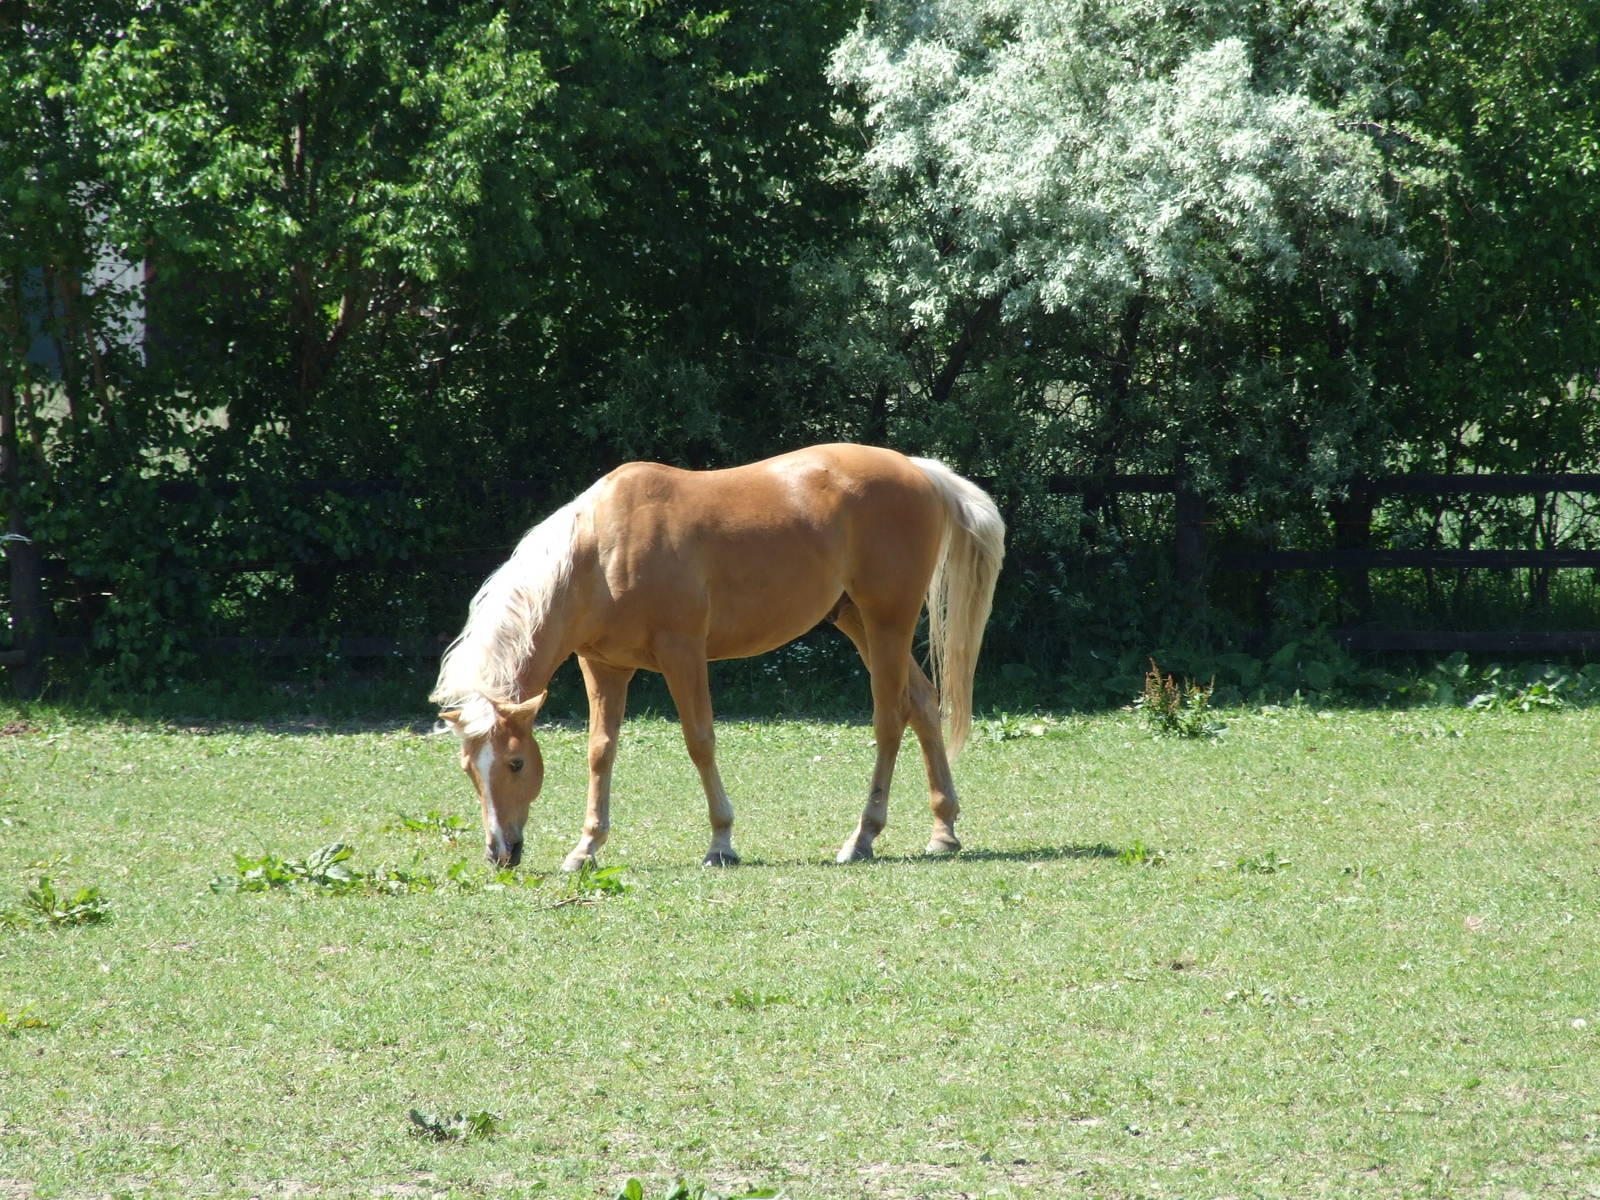 a large horse in the grass eating grass